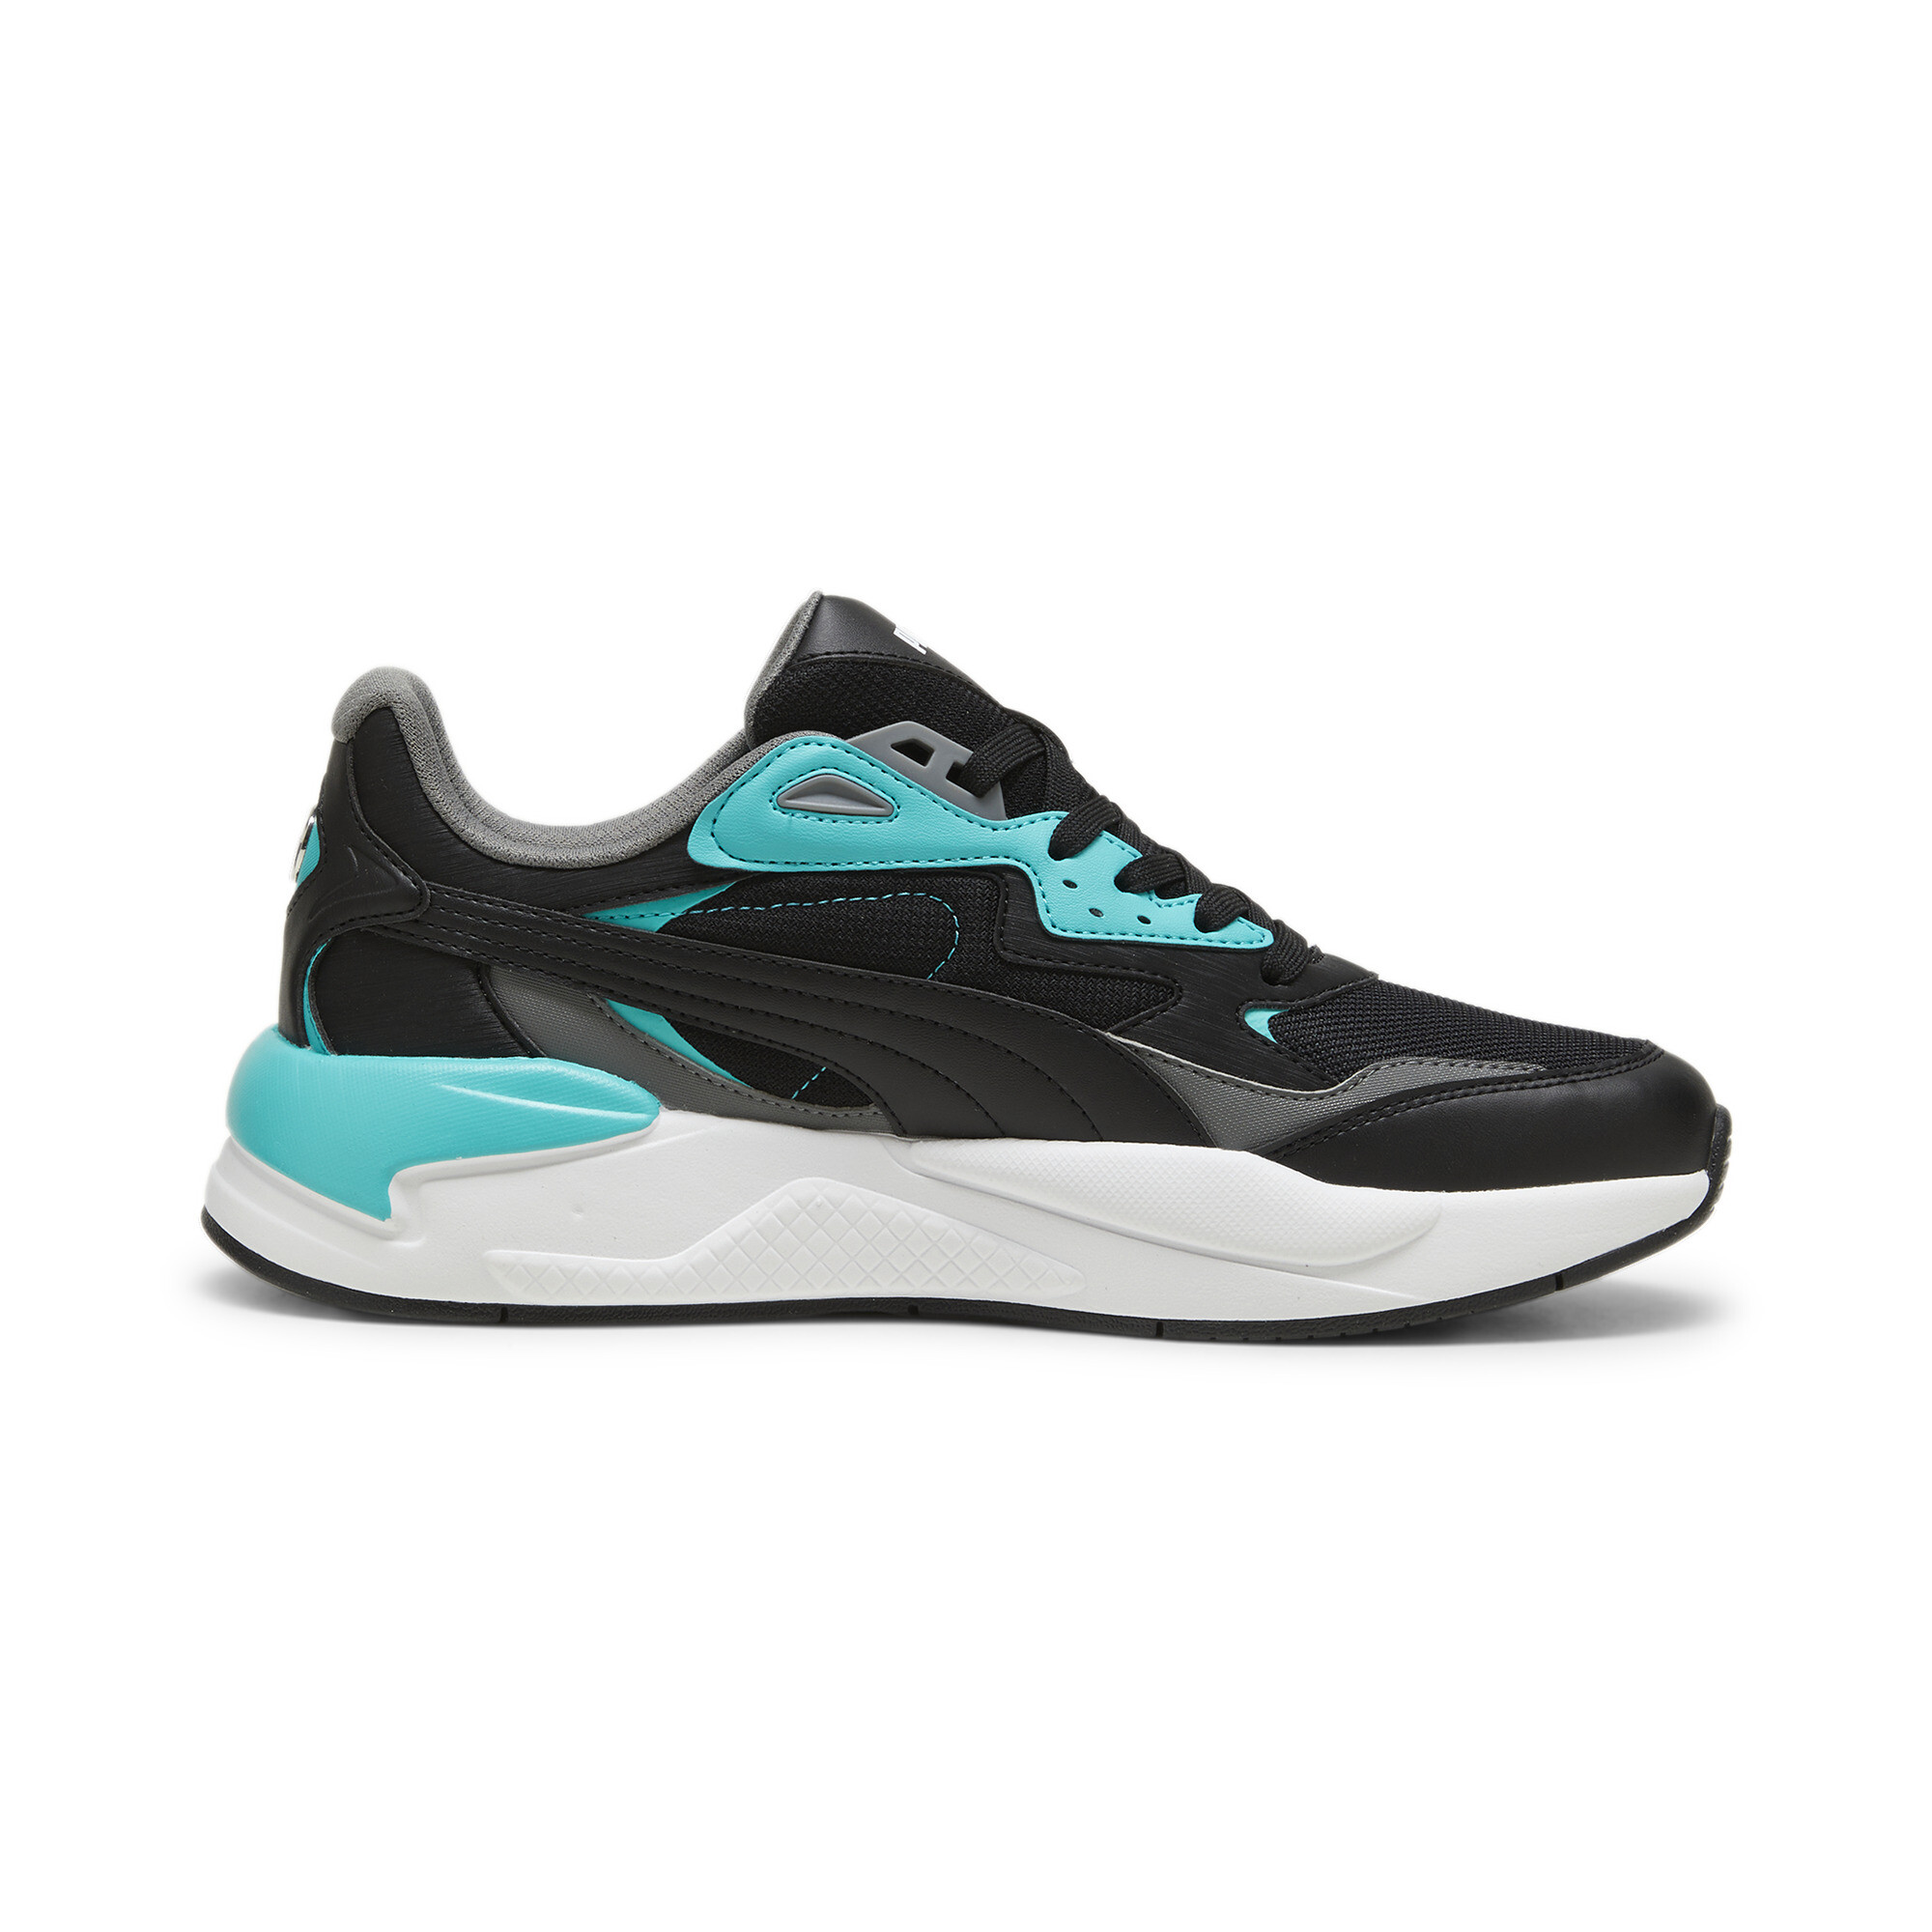 Puma Mercedes F1 X-Ray Speed Motorsport Shoes, Black, Size 38, Shoes